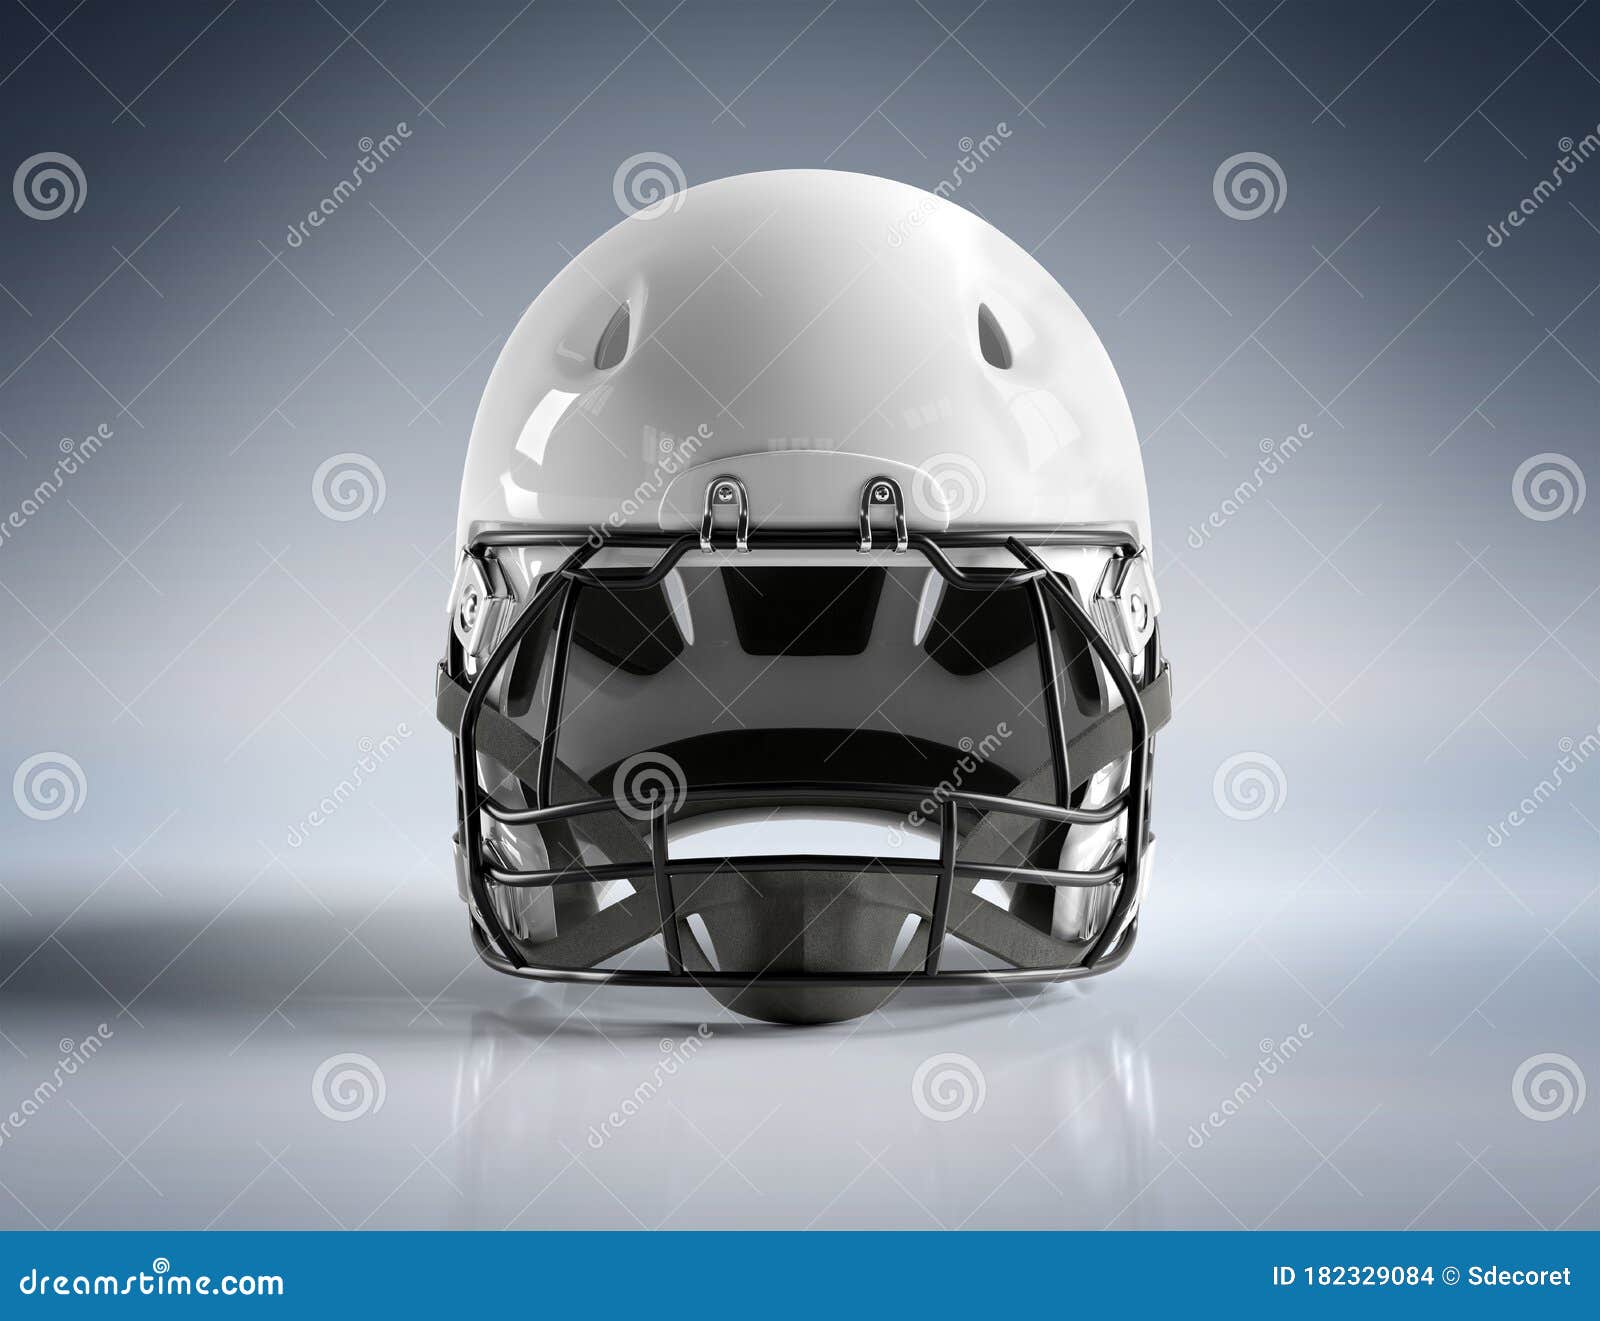 Download White American Football Helmet Isolated On Grey Mockup 3D ...